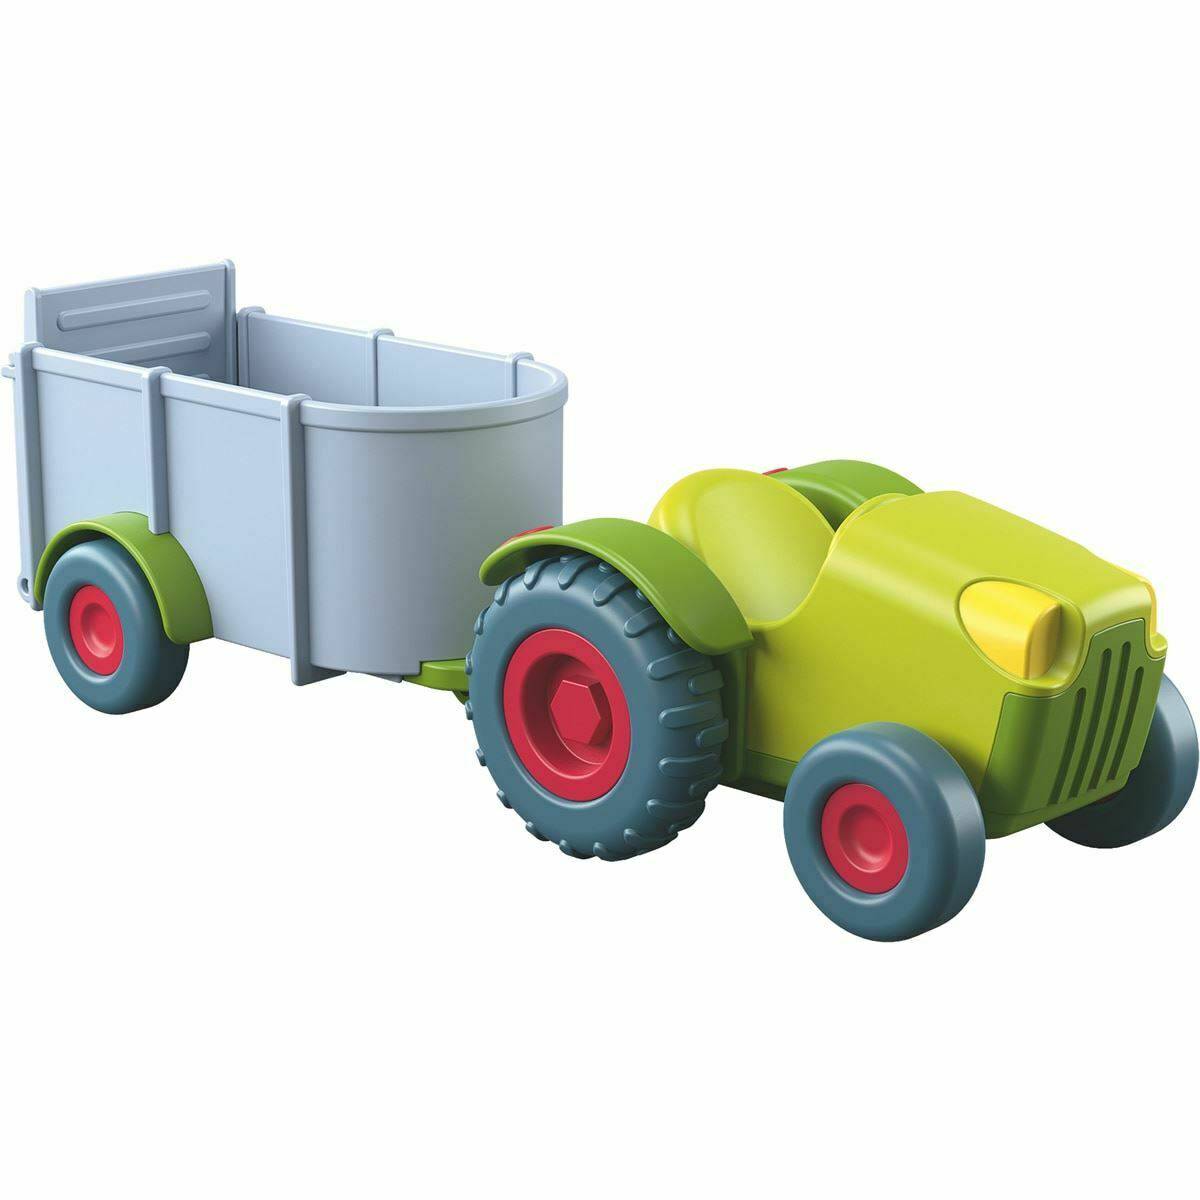 Little Friends Tractor and Trailer - HABA USA